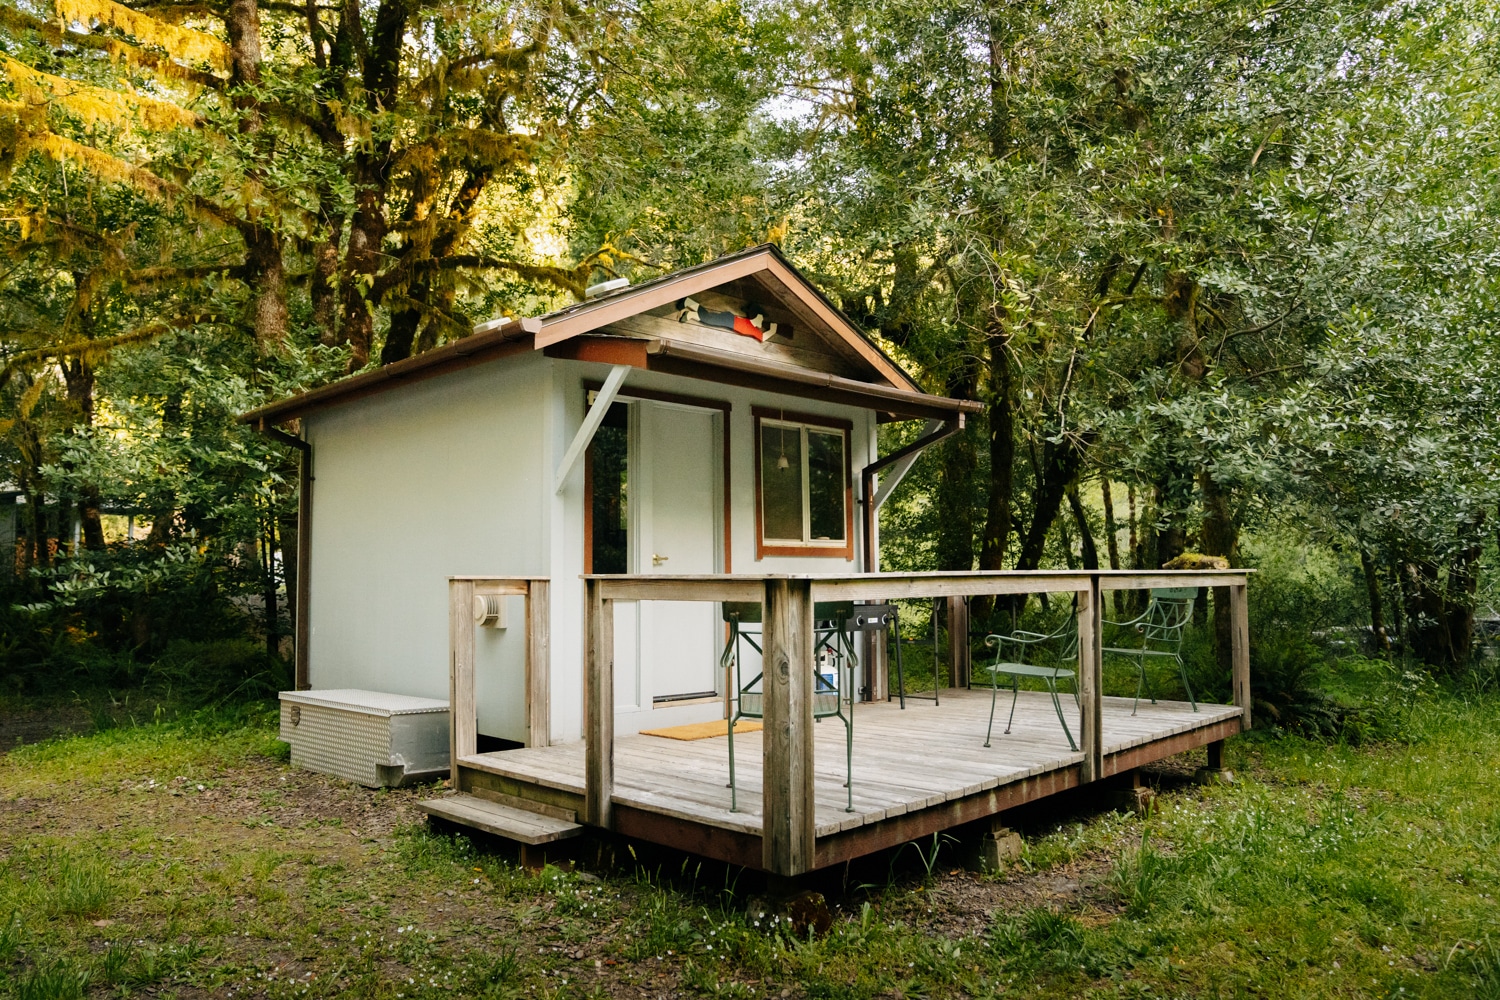 Stay at an Off Grid Tiny Cabin in the Redwoods